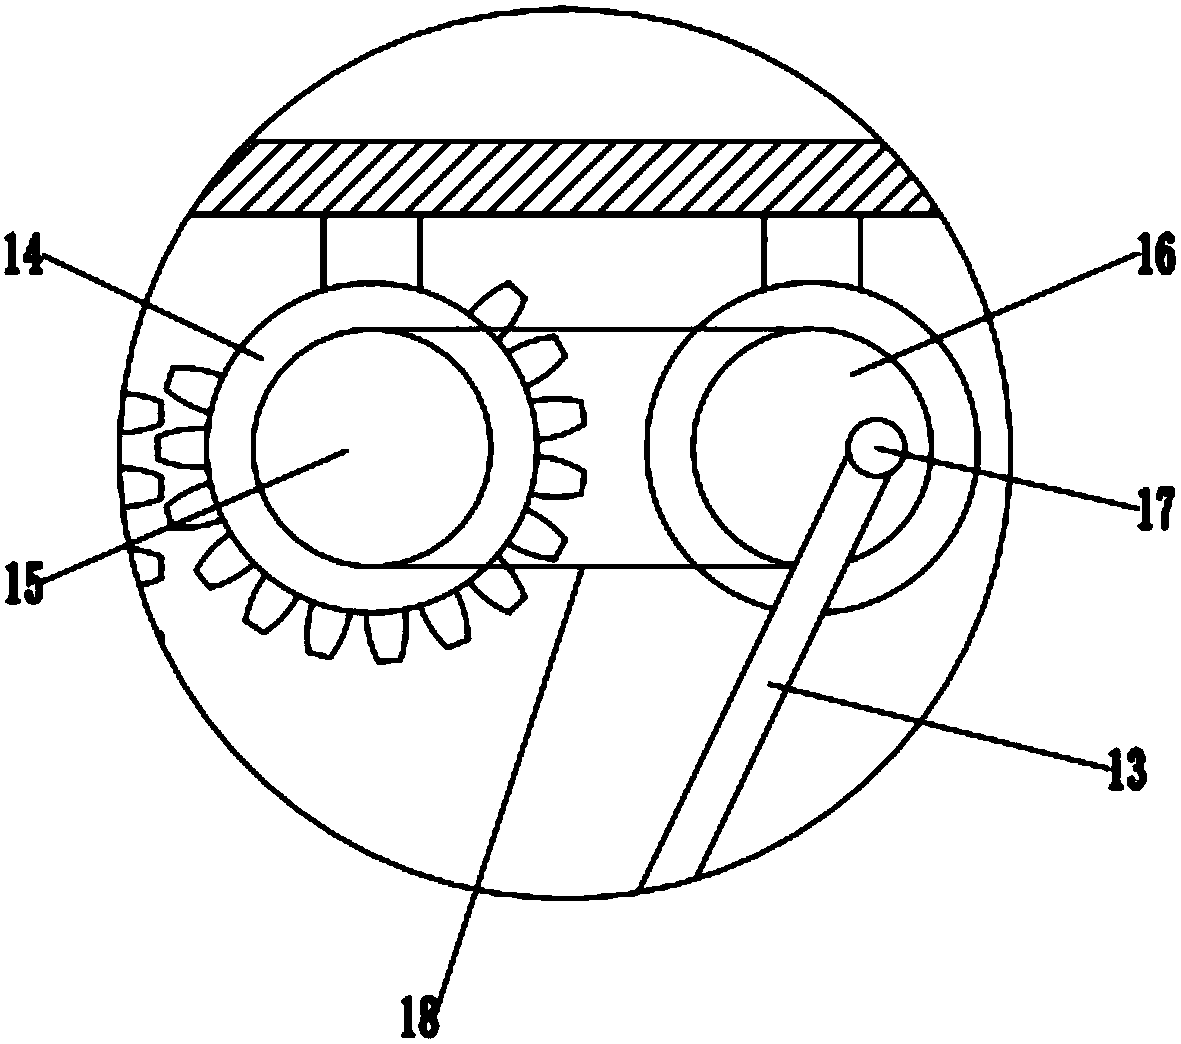 Multi-angle wool compaction device